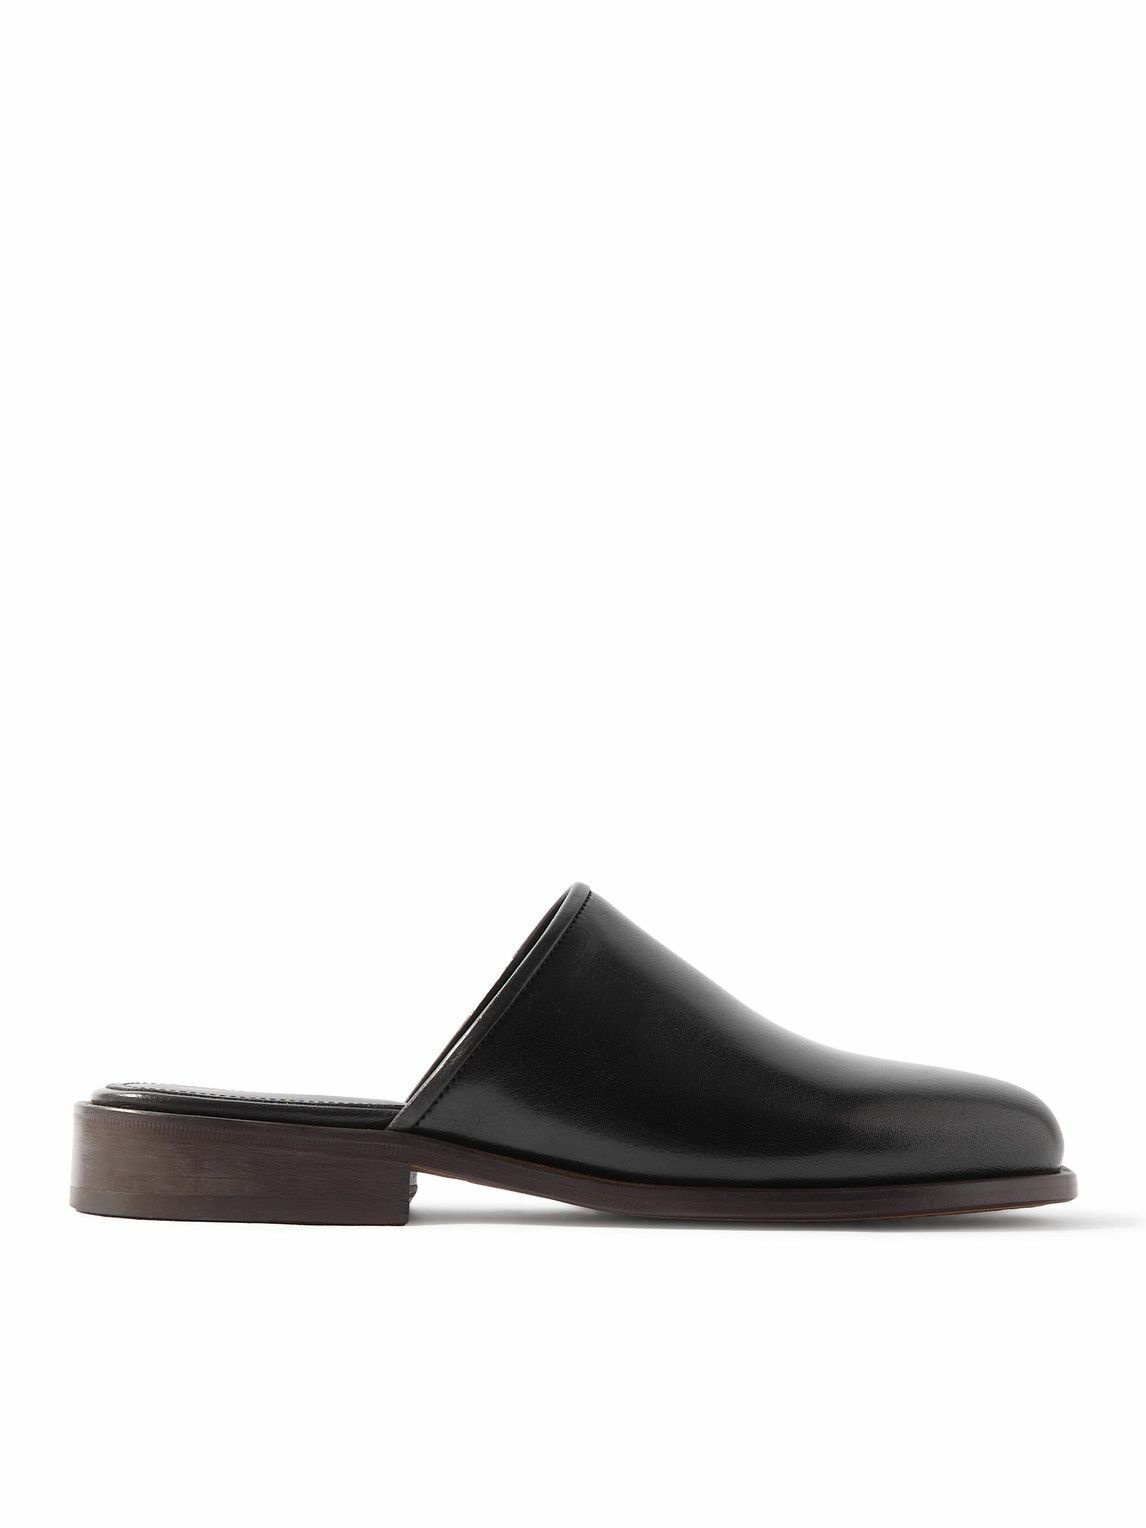 Lemaire - Leather Mules - Black Lemaire